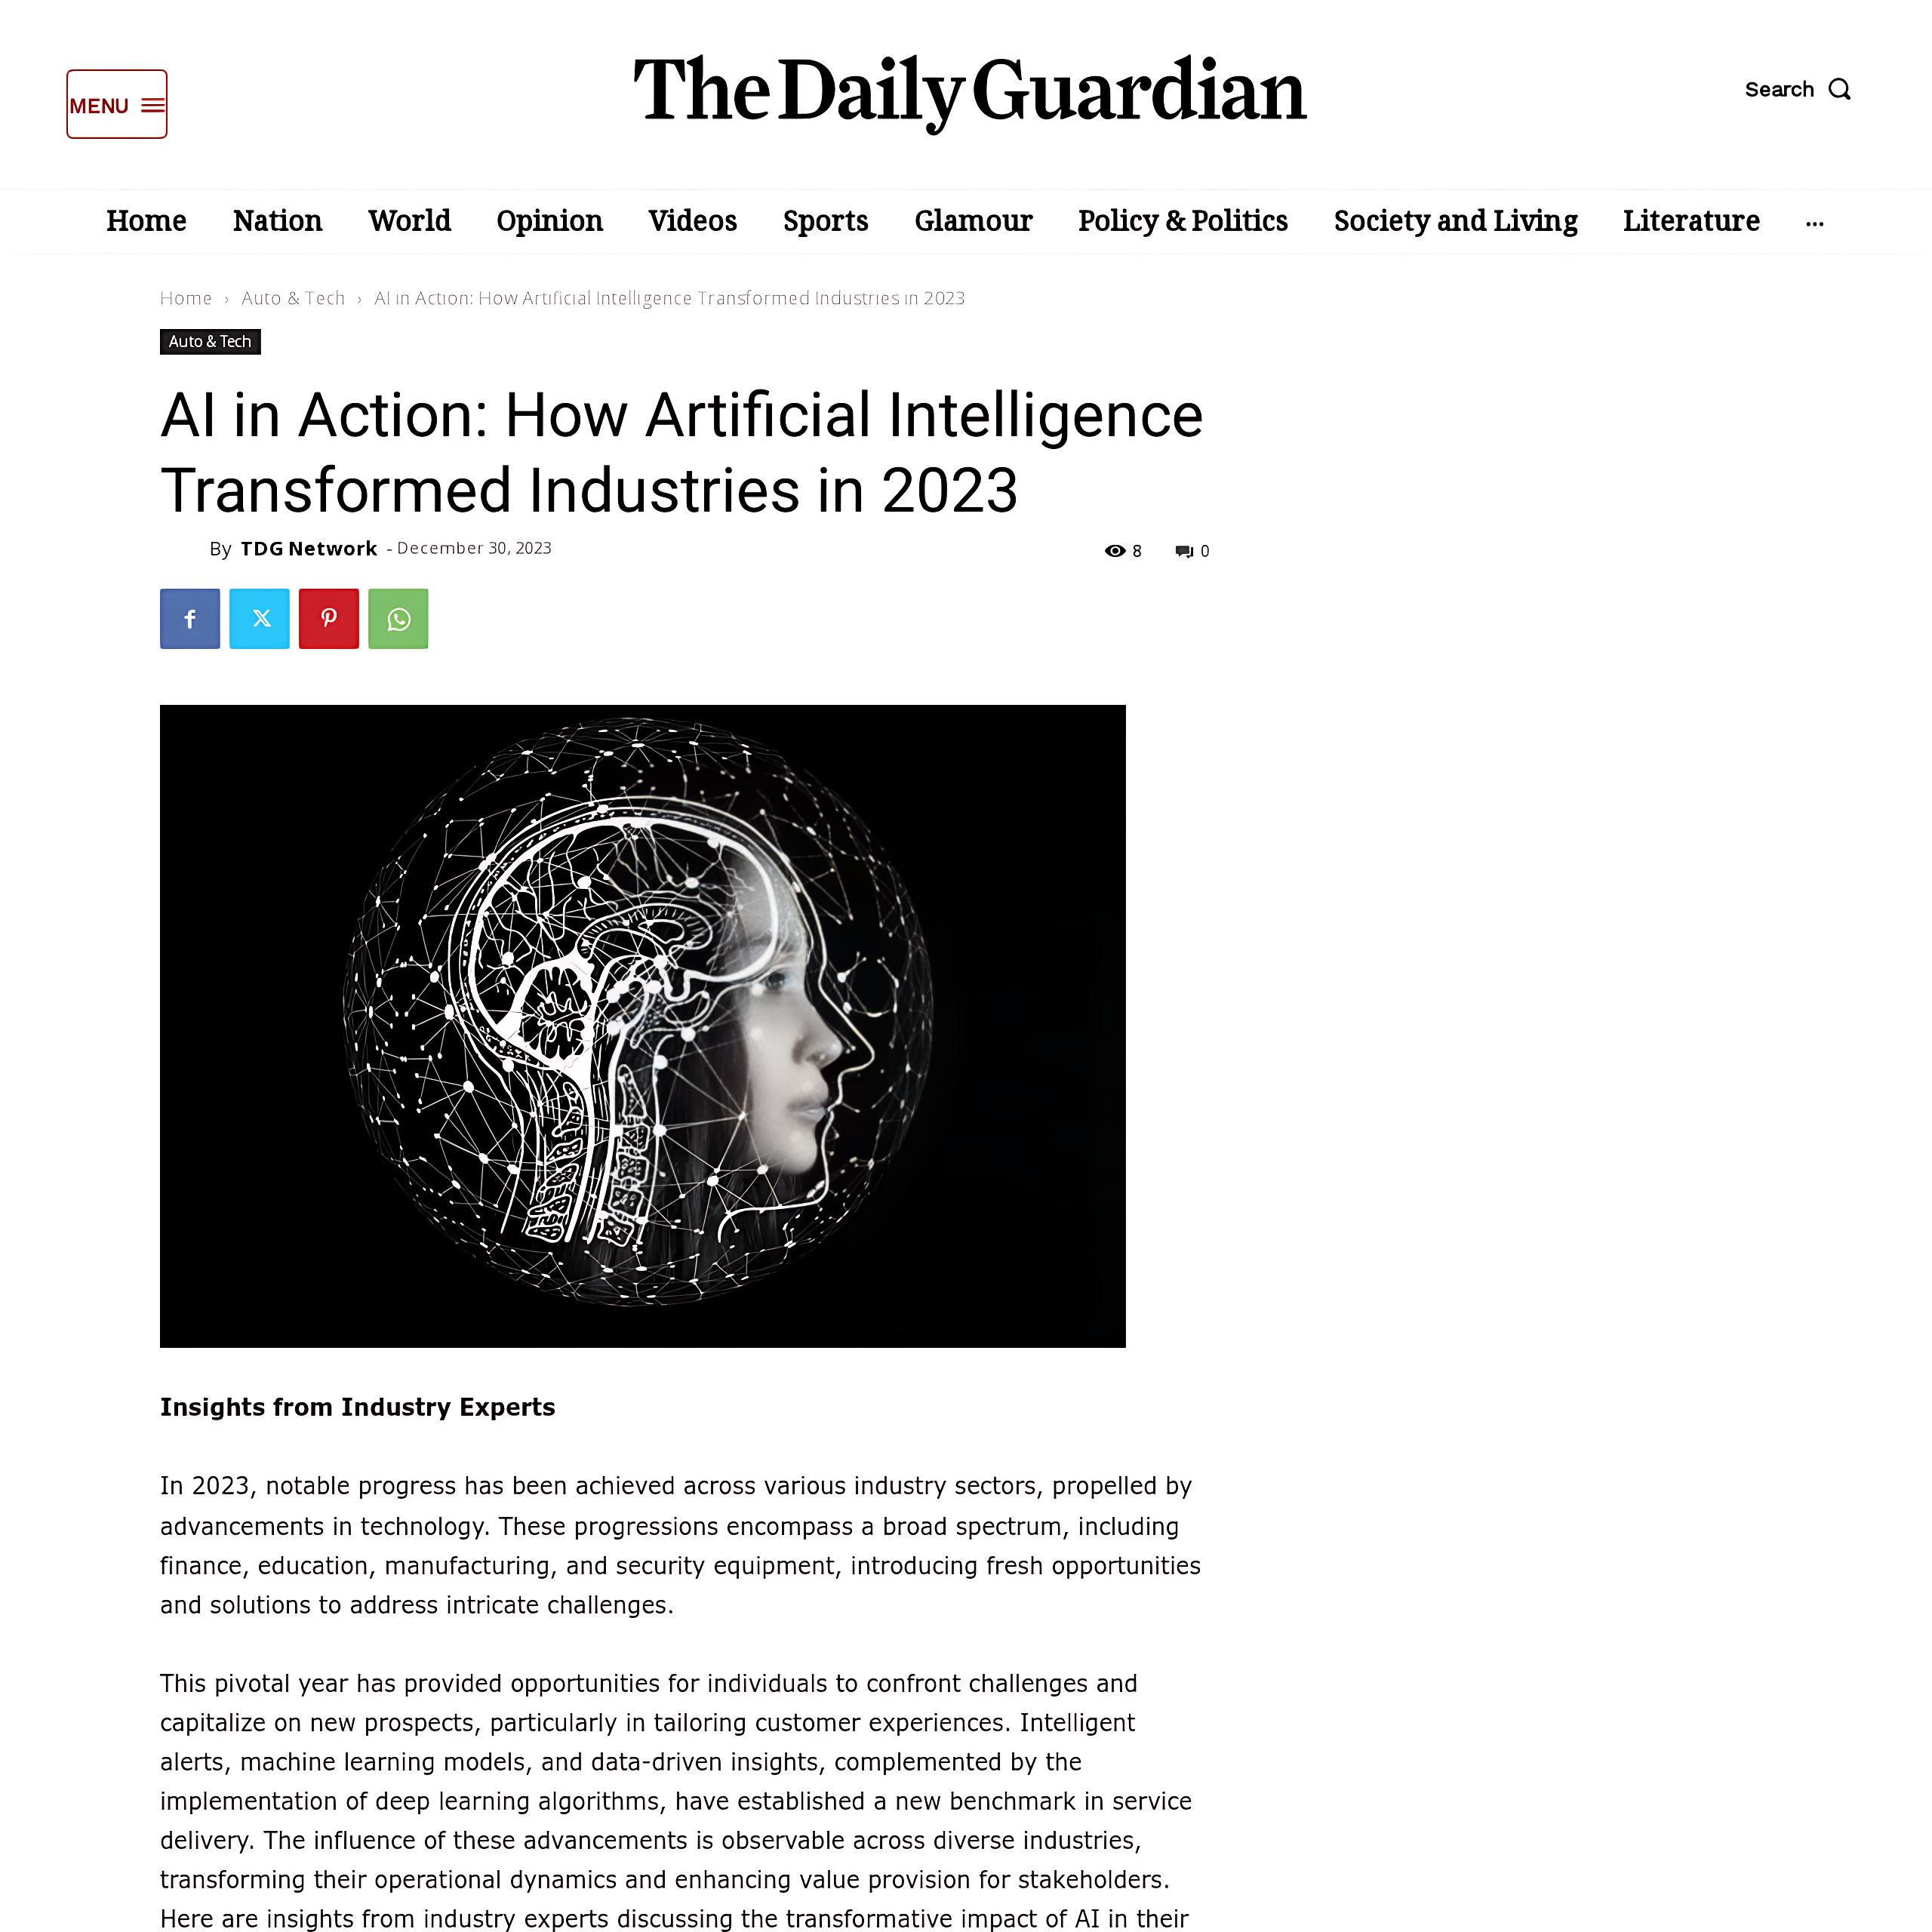 AI in Action: How Artificial Intelligence Transformed Industries in 2023